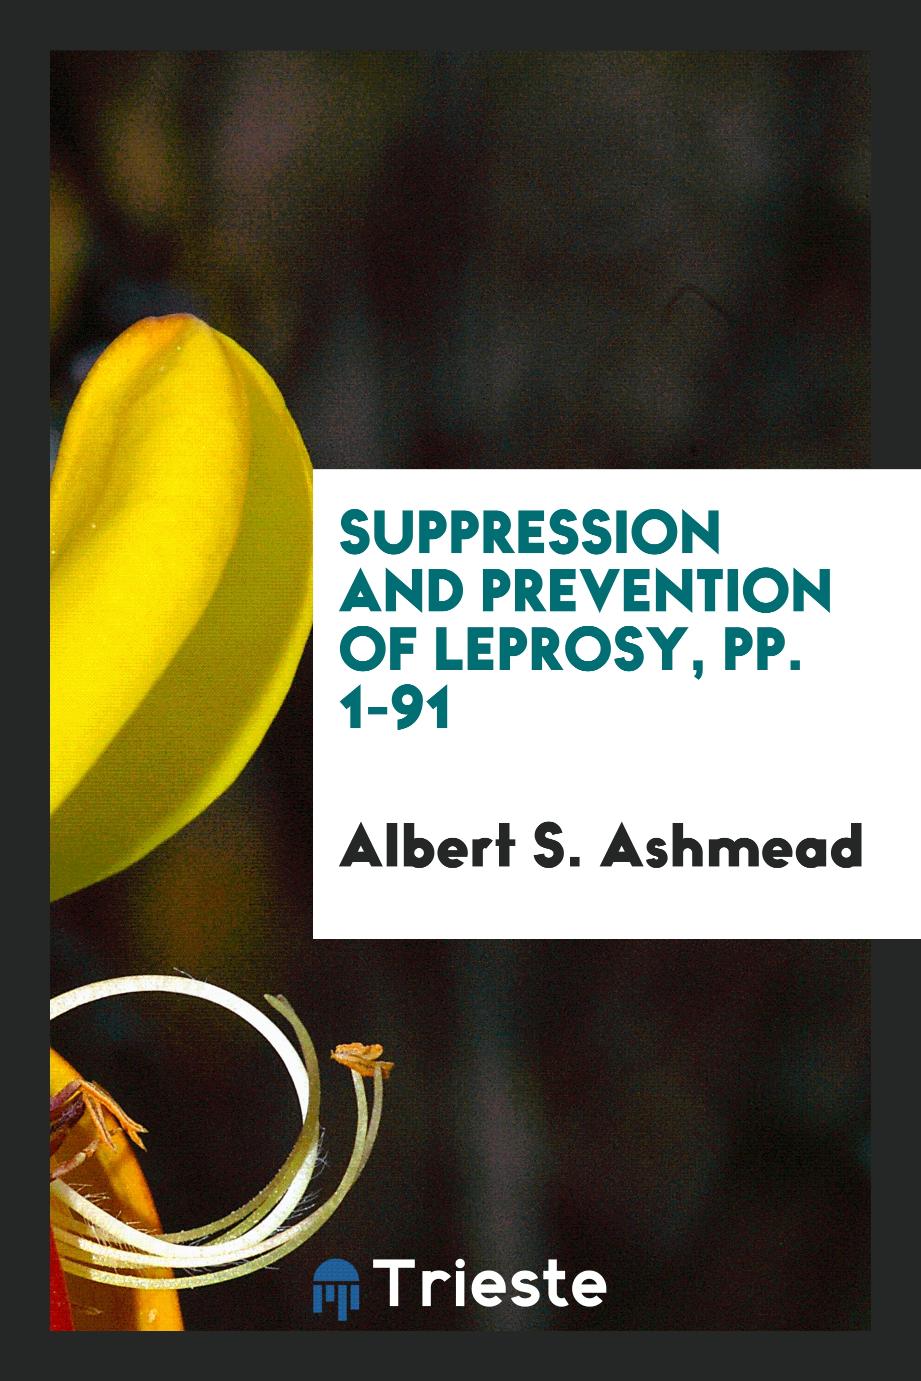 Suppression and Prevention of Leprosy, pp. 1-91